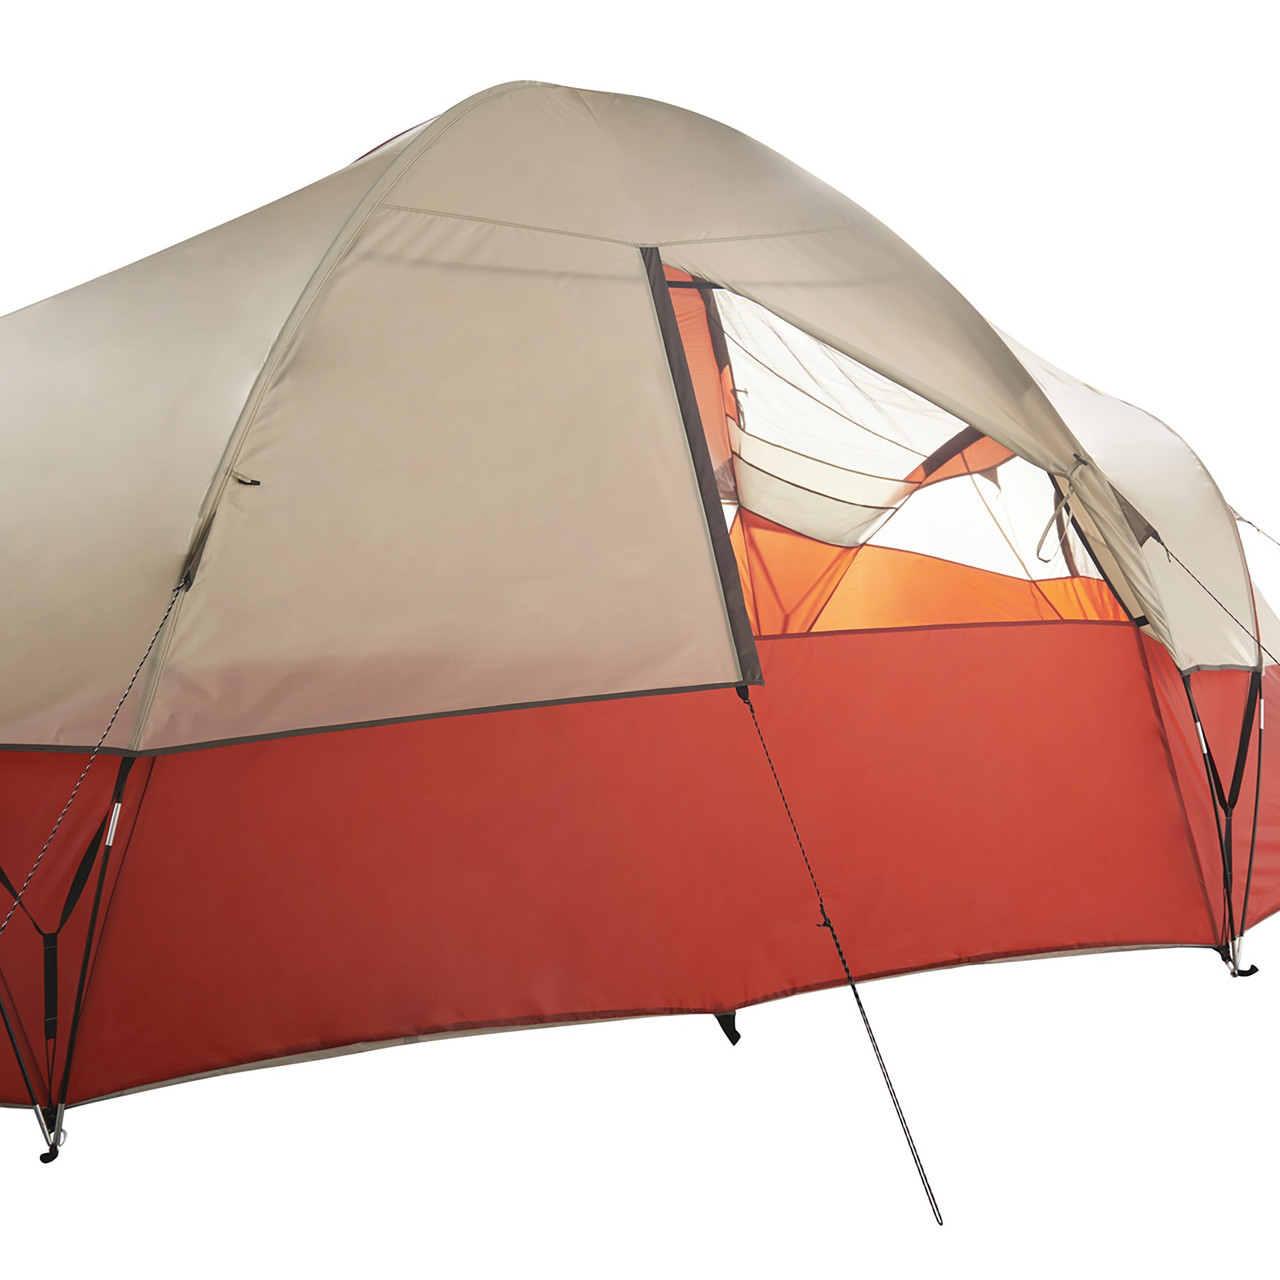 Wenzel Bristlecone 8 Person Dome Tent, showing rear window, partially closed